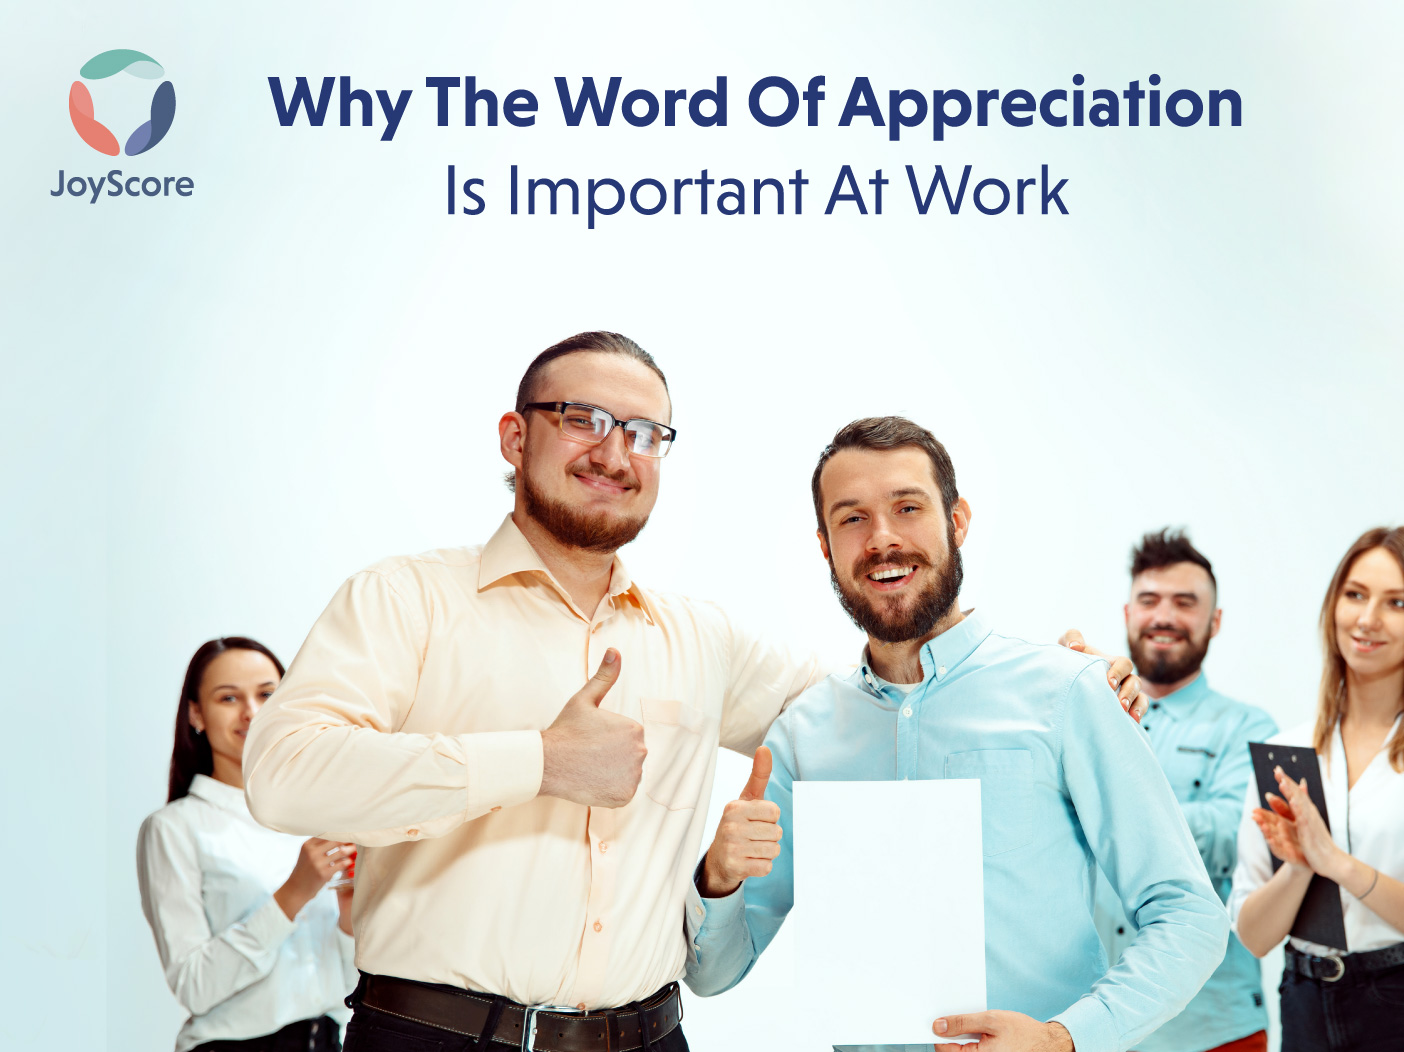 Why the Word of Appreciation is Important at Work